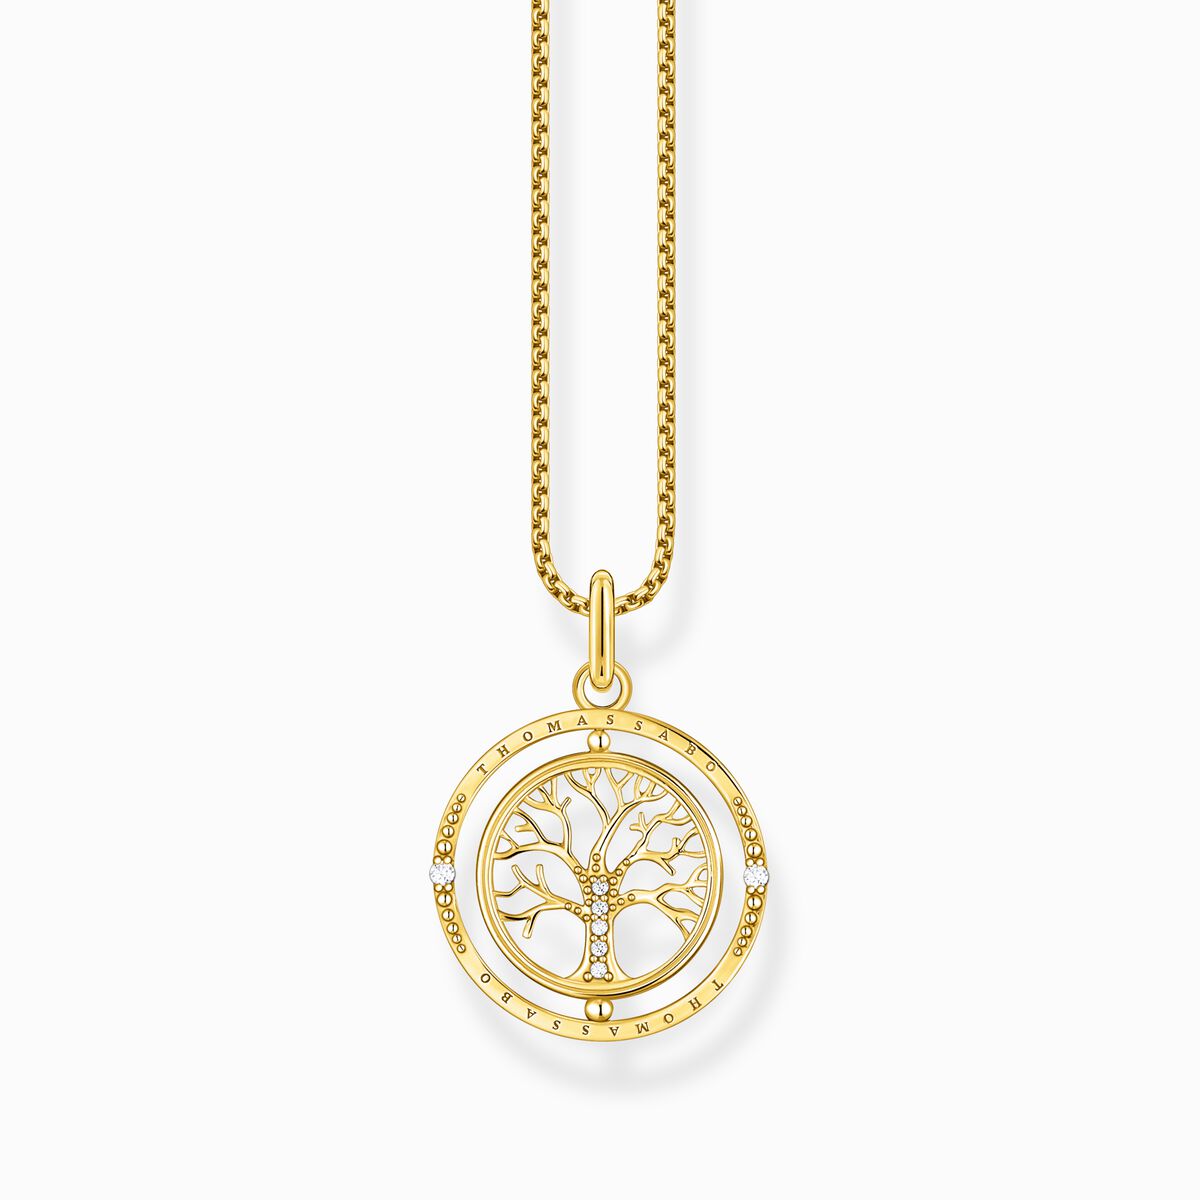 Thomas Sabo Leaves Gold Necklace